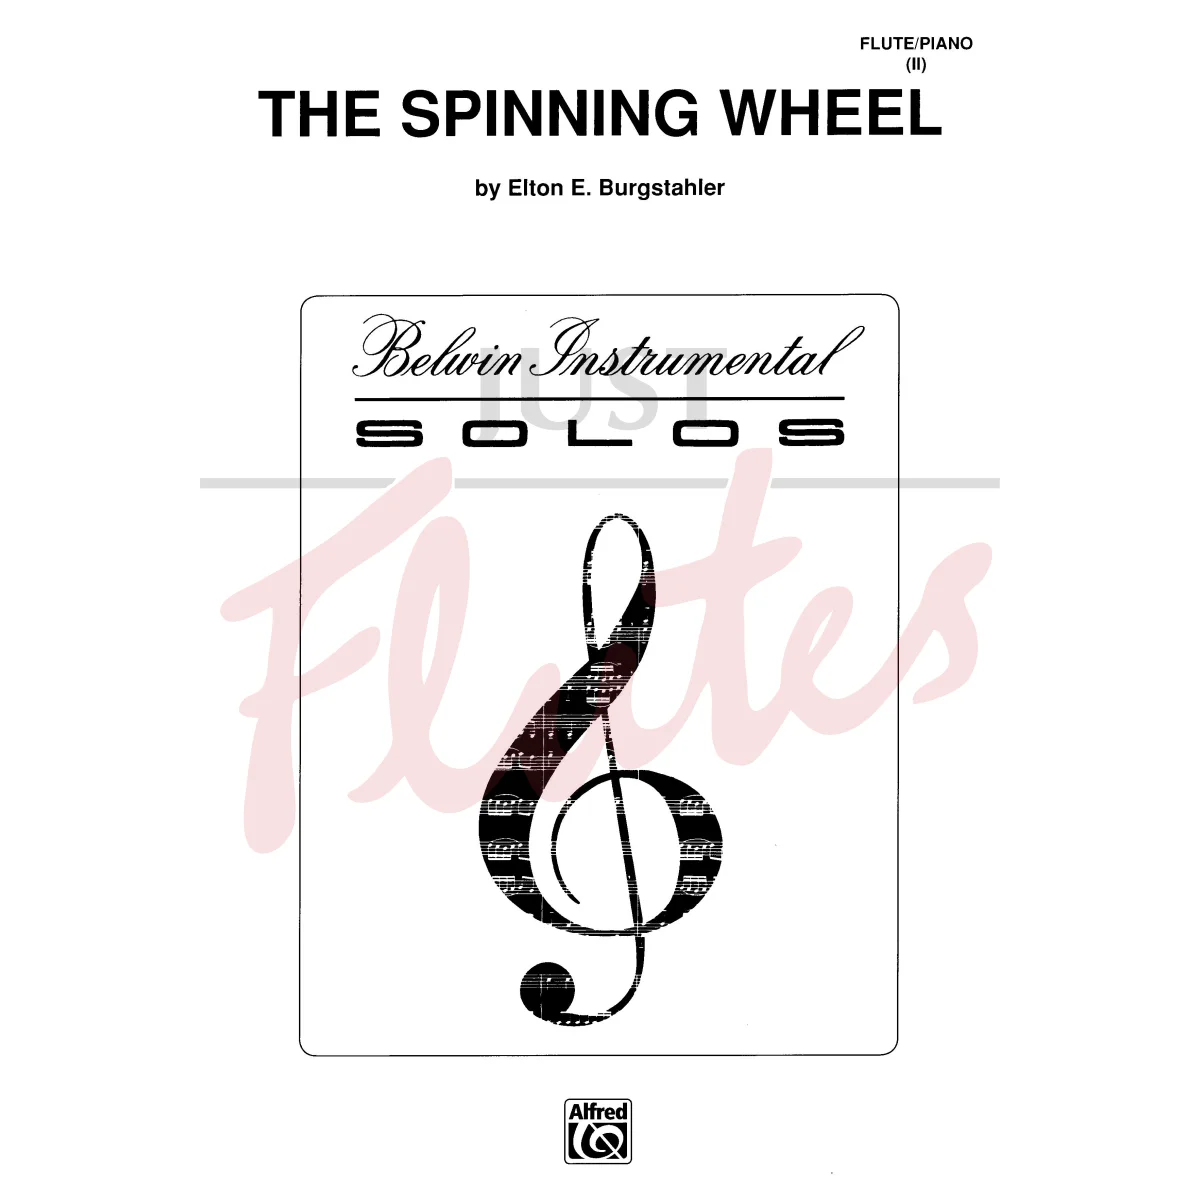 The Spinning Wheel for Flute and Piano